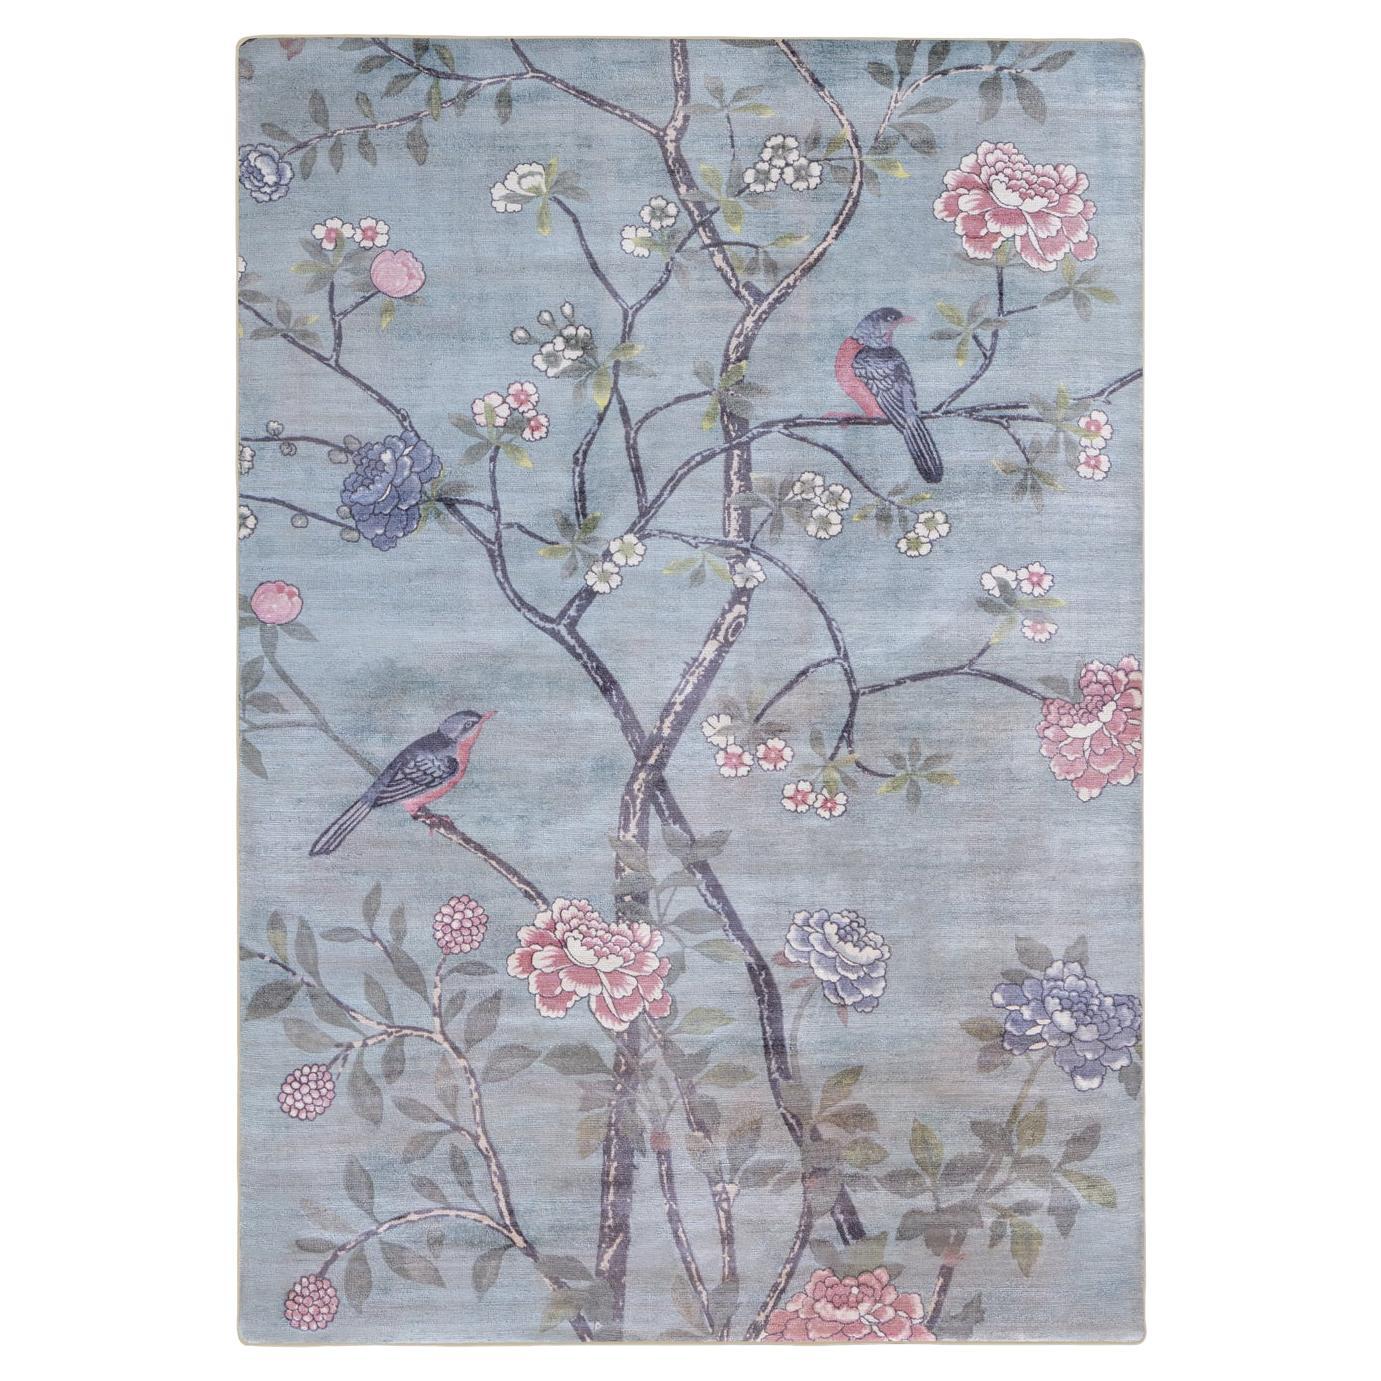 Contemporary Japanese Style Drawings Colorful Rug by Deanna Comellini 300x400 cm